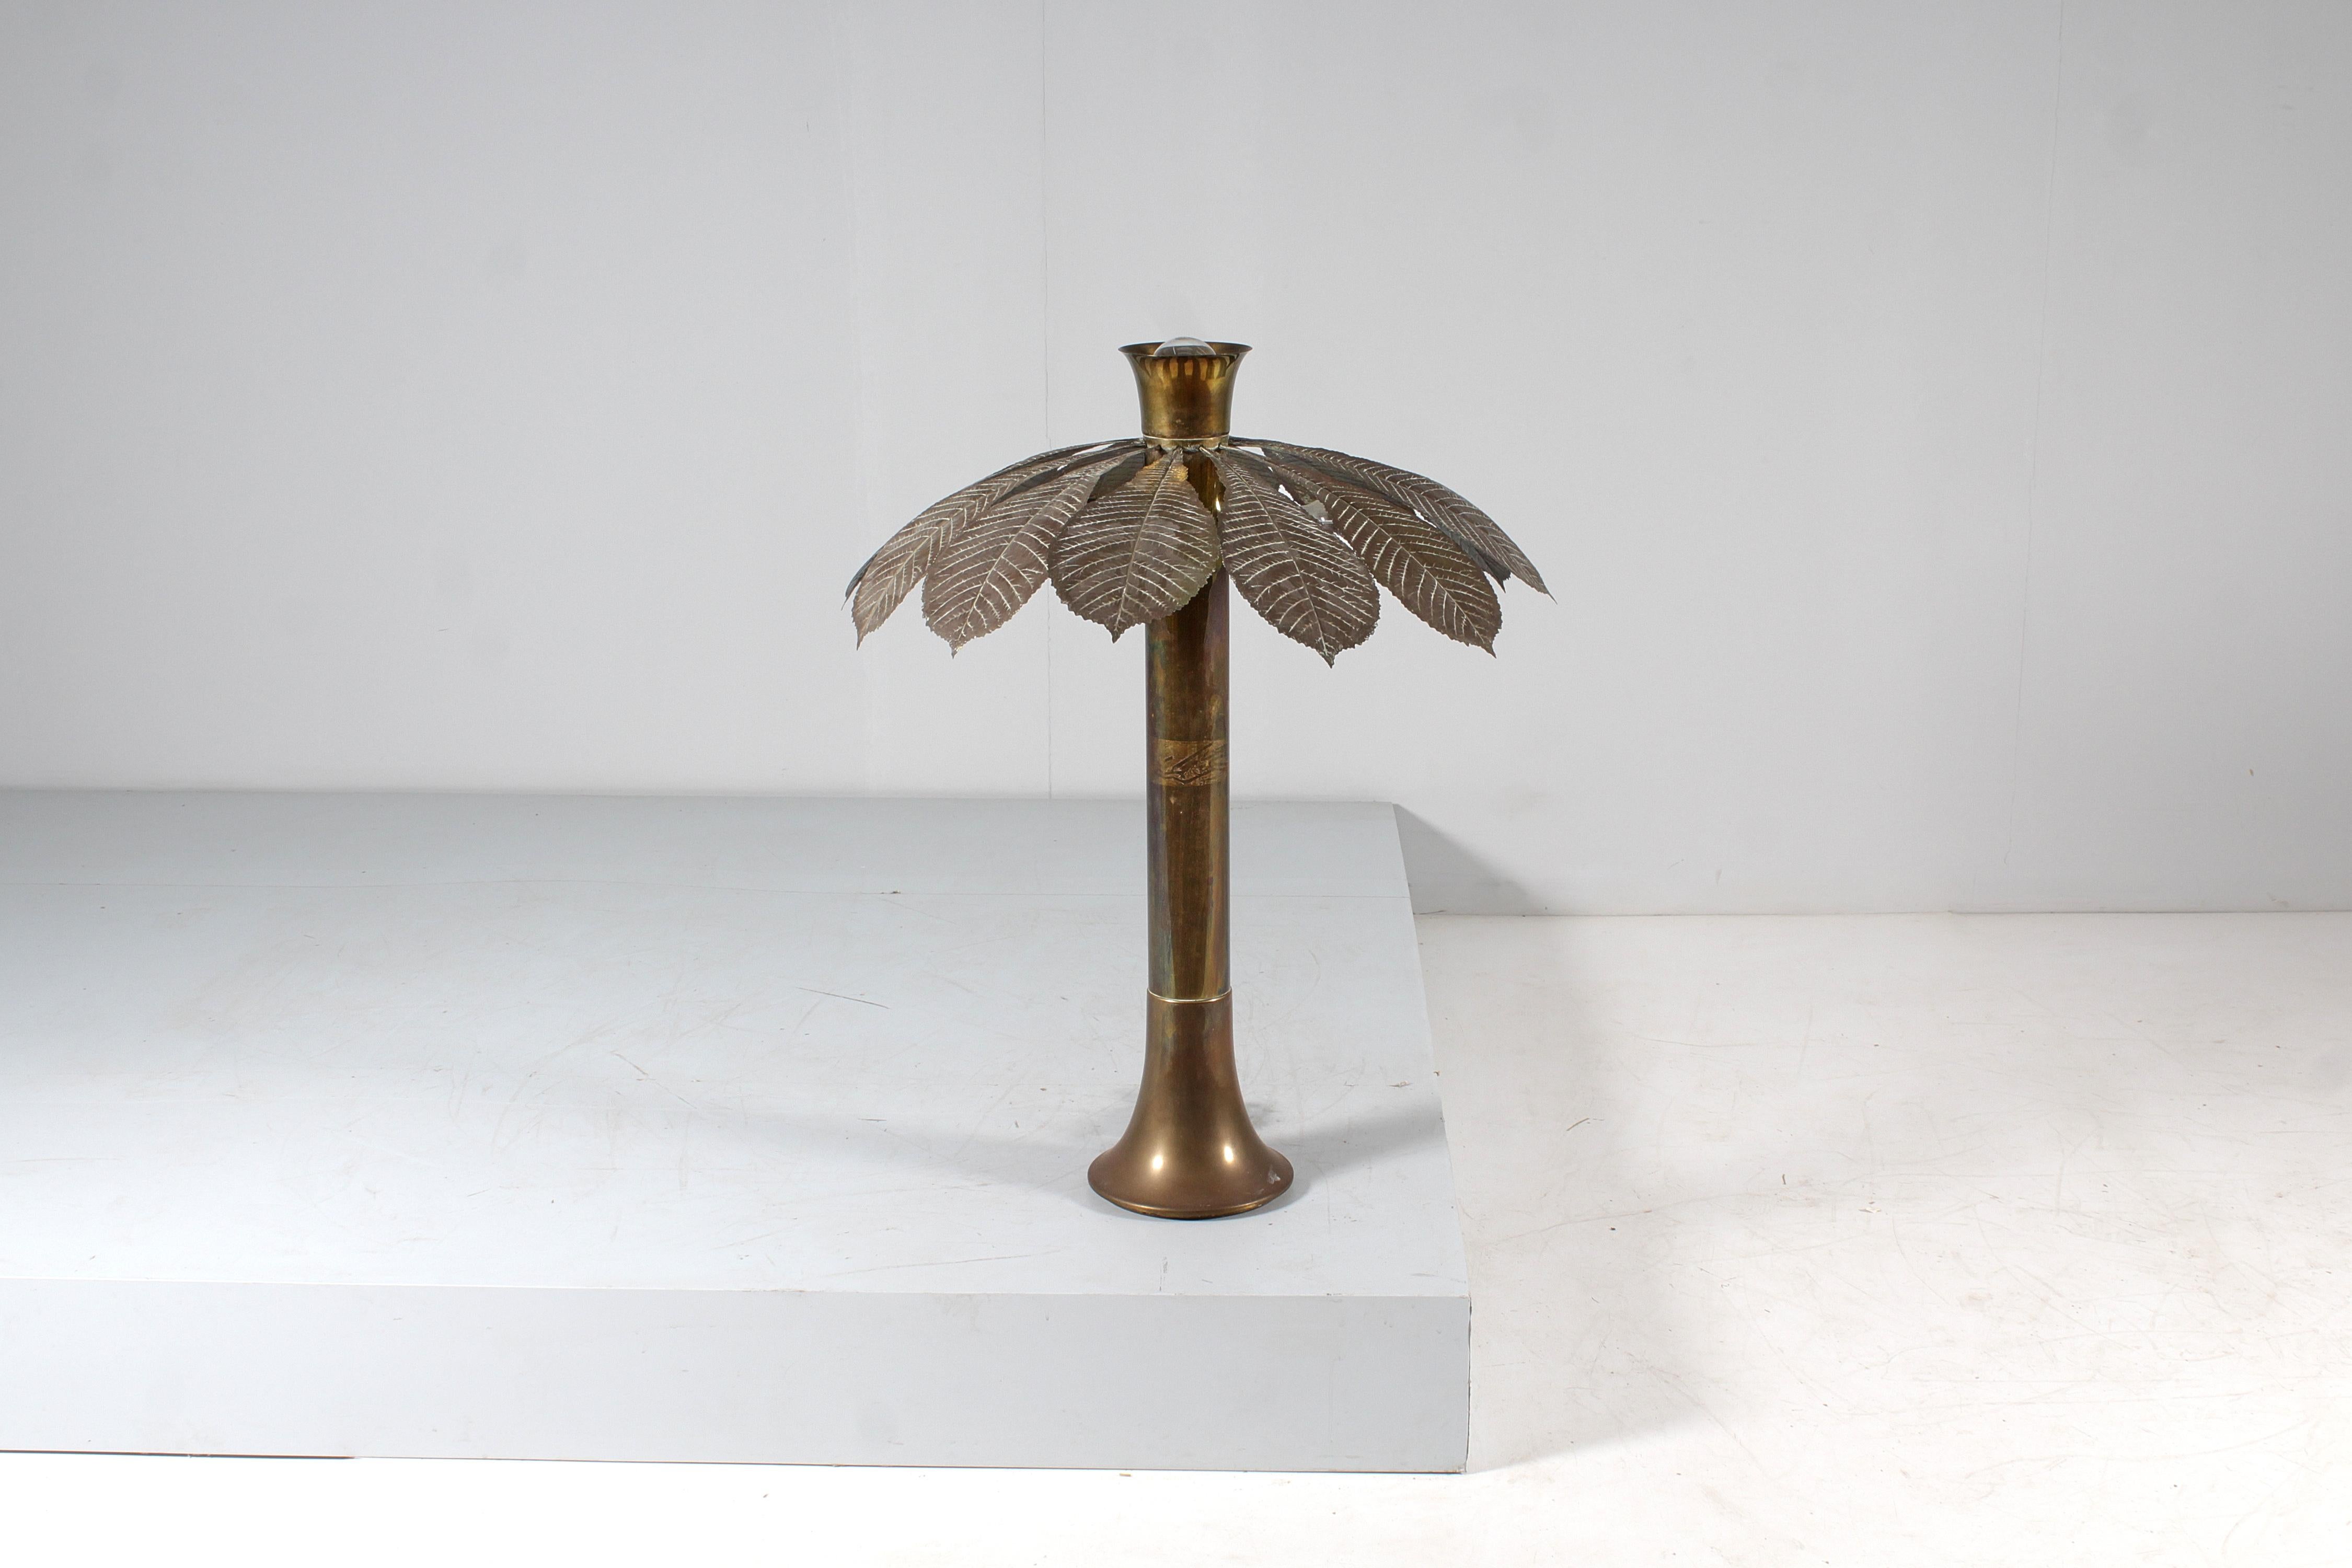 Table lamp mod. “L' Ippocastano” by Carlo Giorgi for Bottega Gadda Milano, Italy 1970s.
Brass structure, hand hammered twelve brass leaves inserted with screws around the lights. It works with 4 bulbs with an E14 screw connection and a central one,